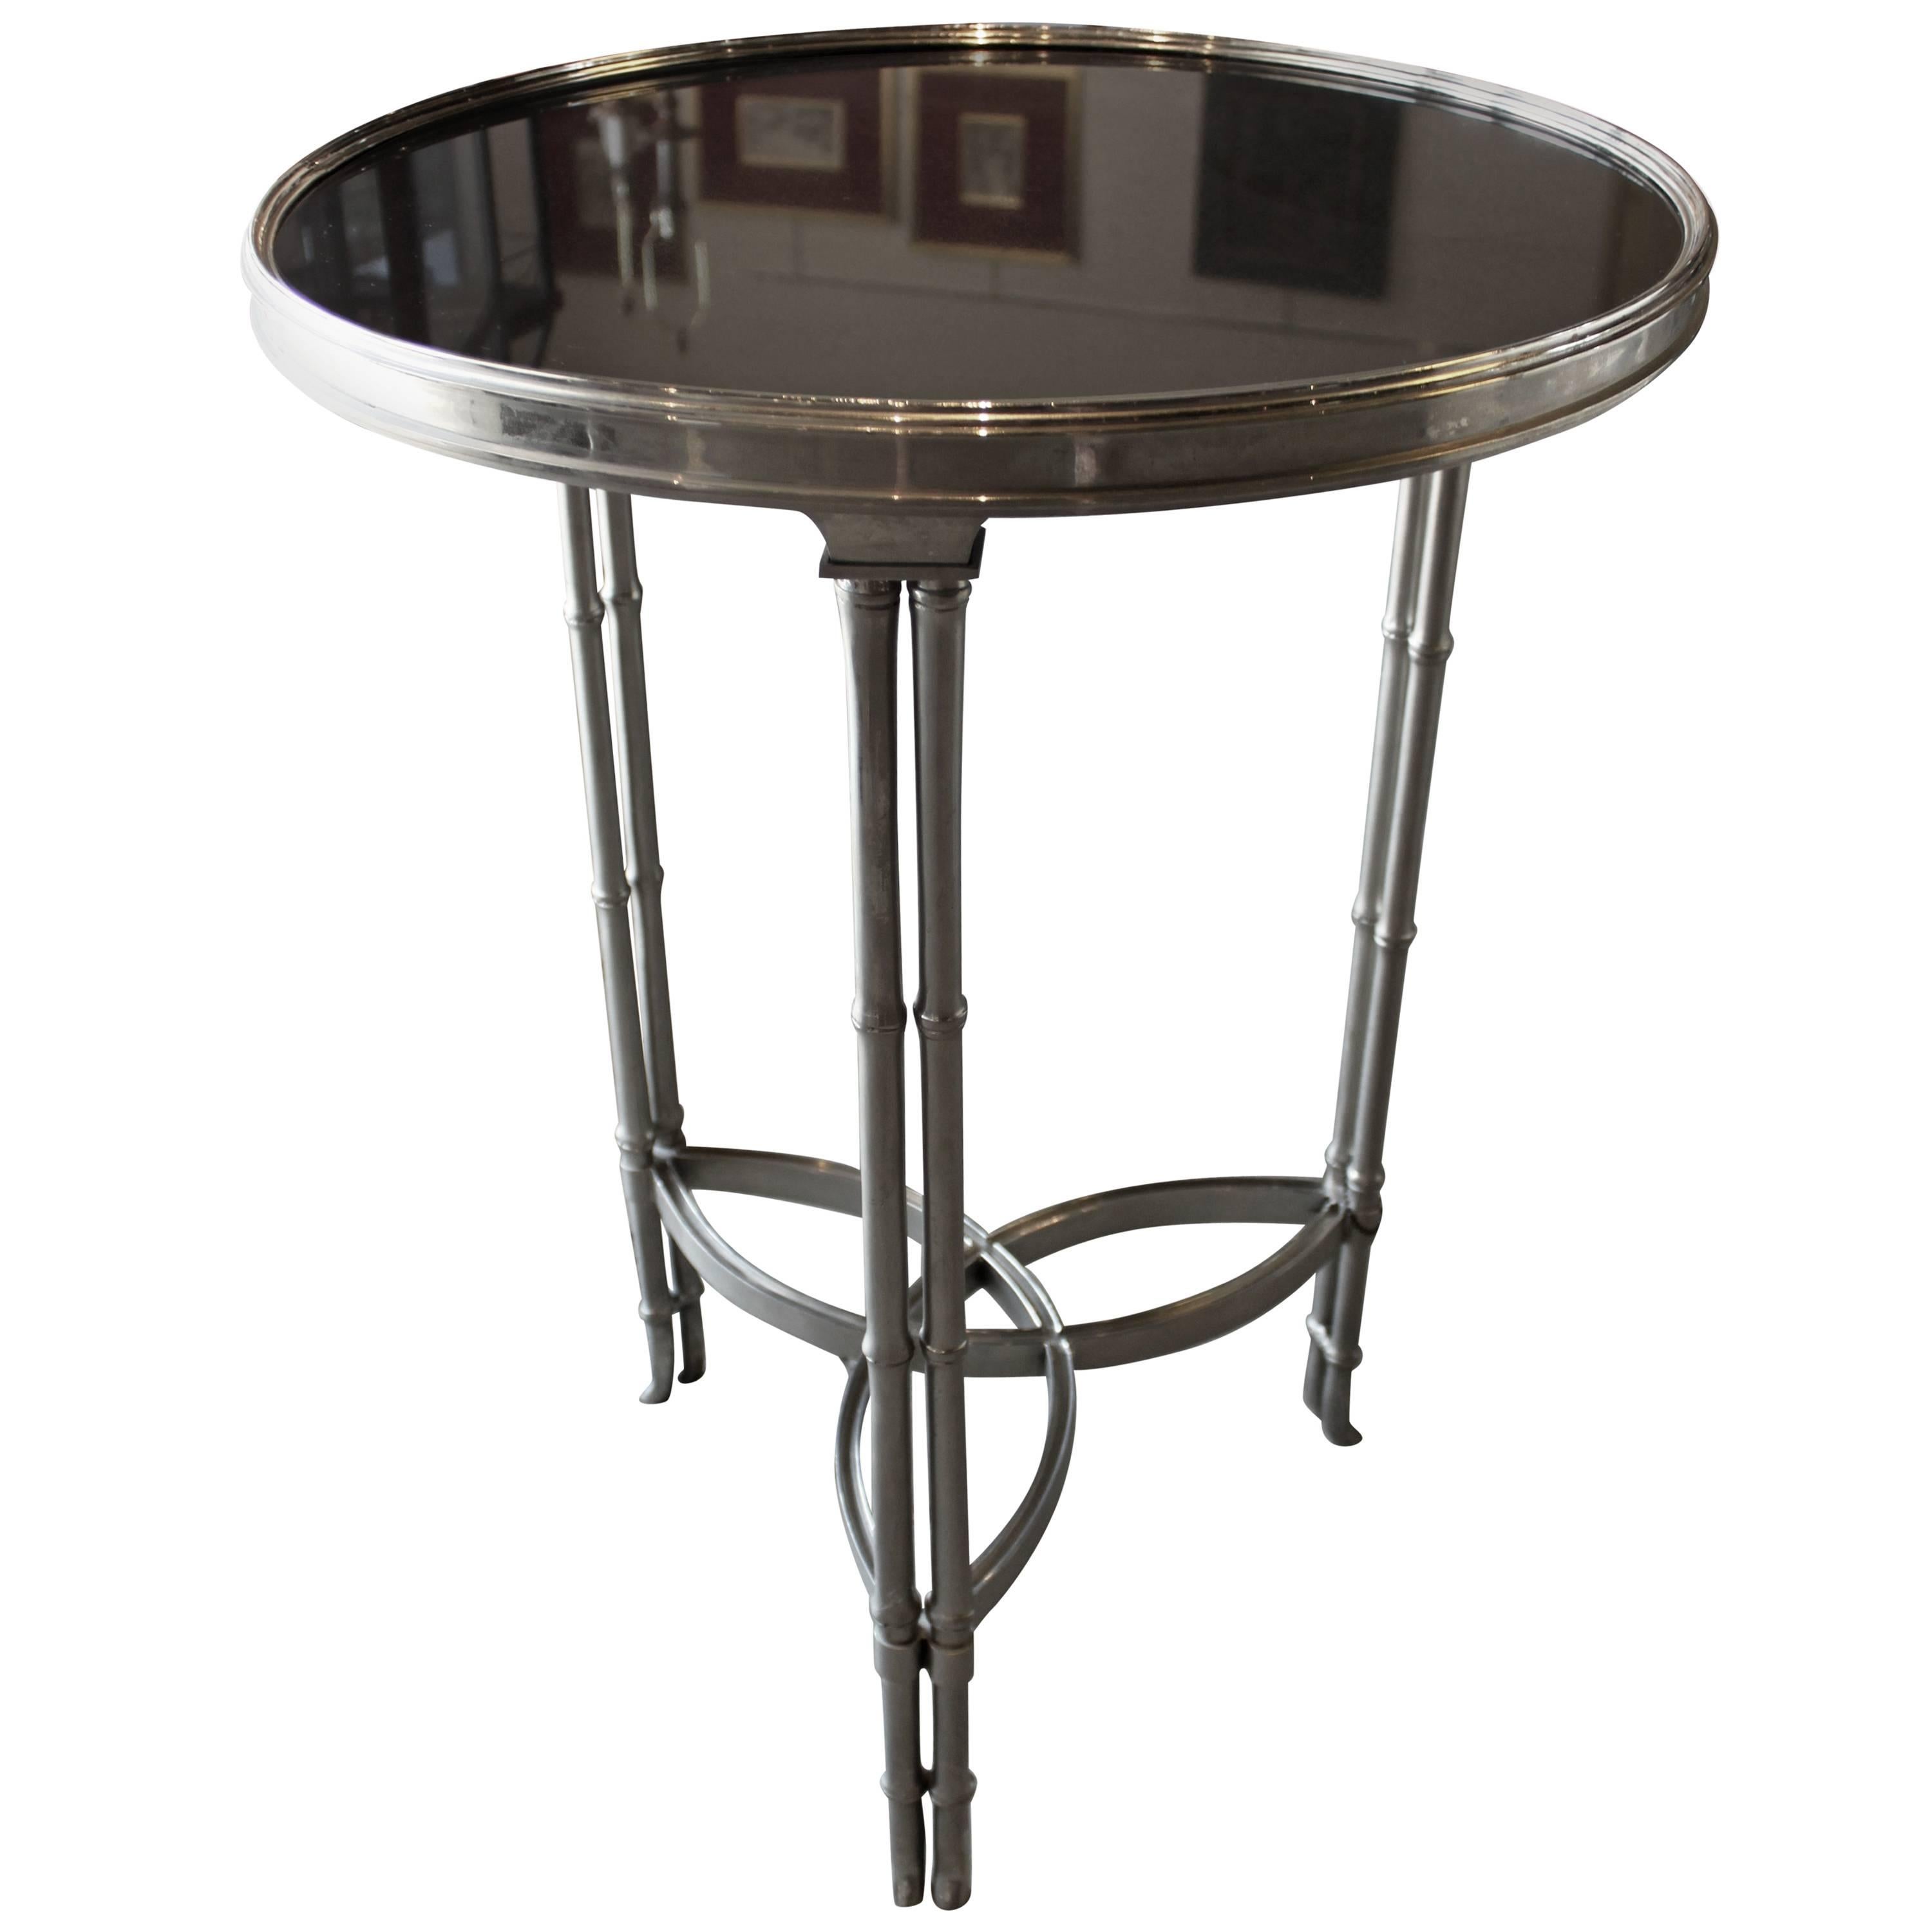 Stone Top Gueridon Table For Sale